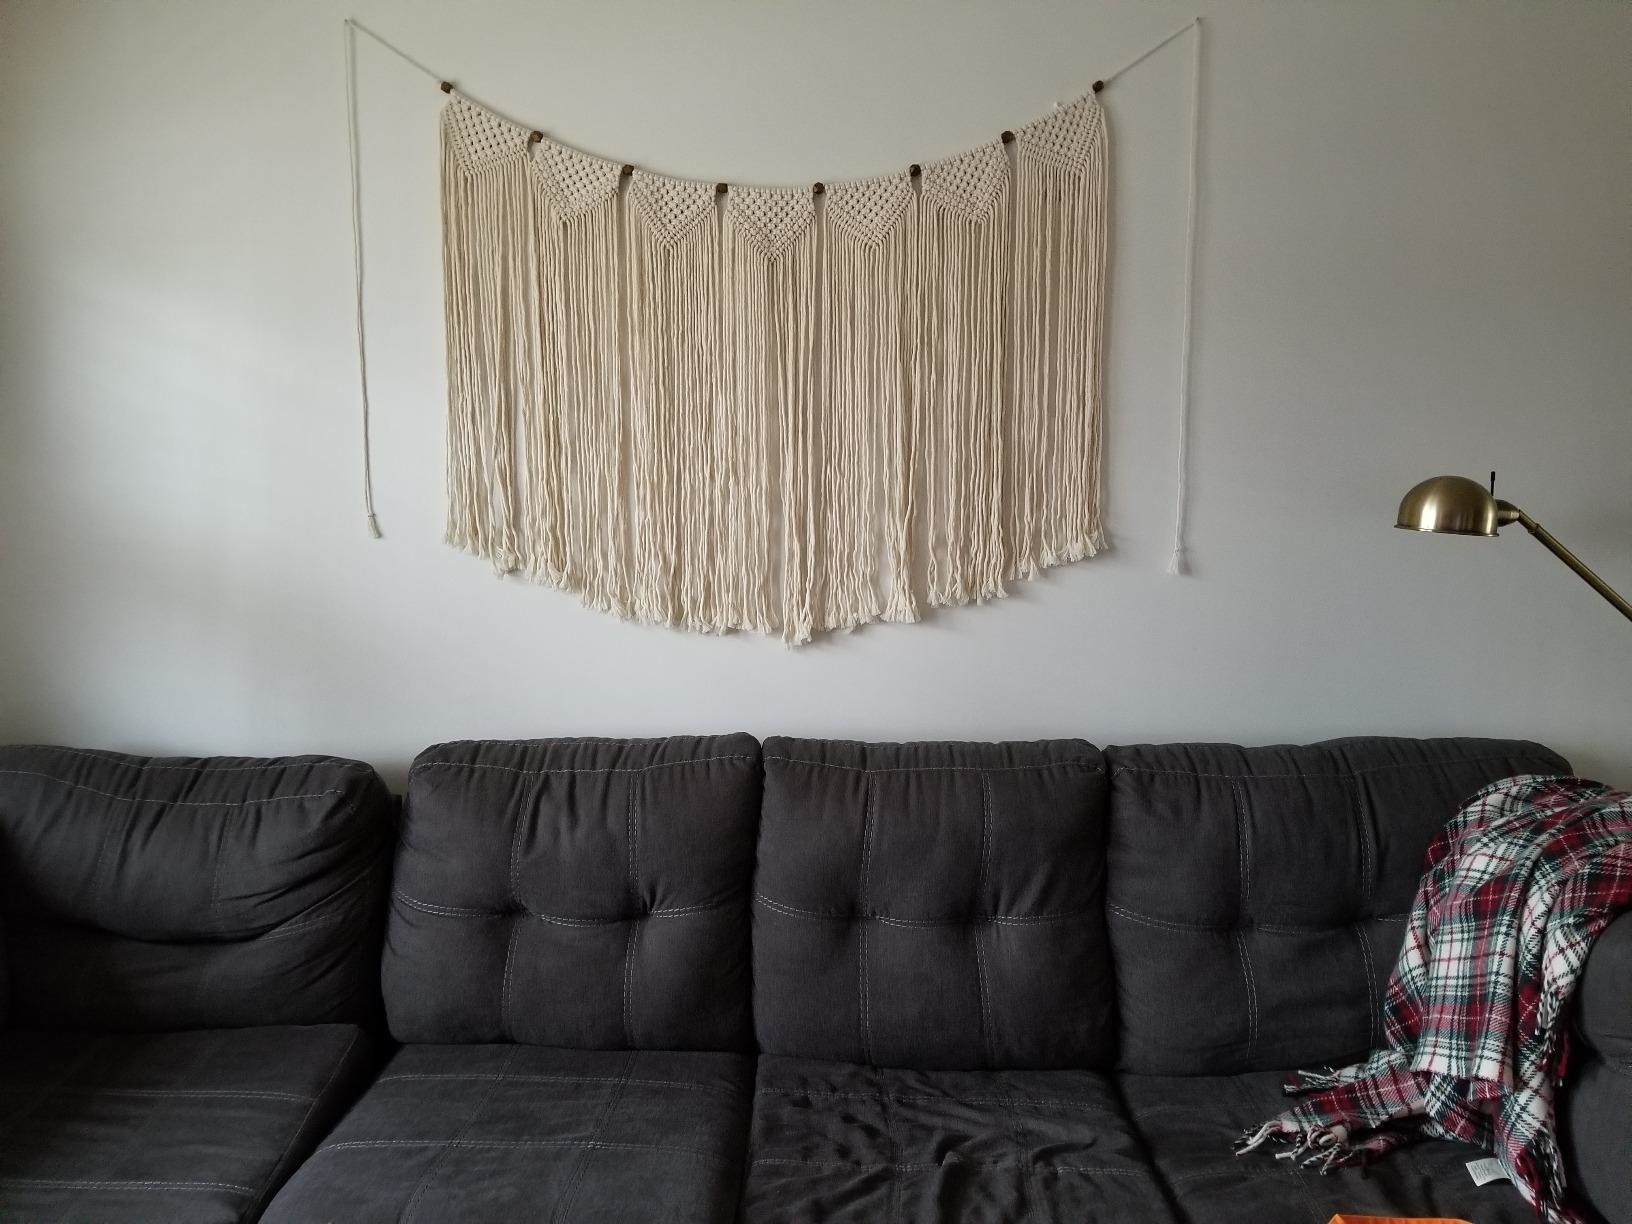 The wall hanging, which is about half the length of a four-seater sofa